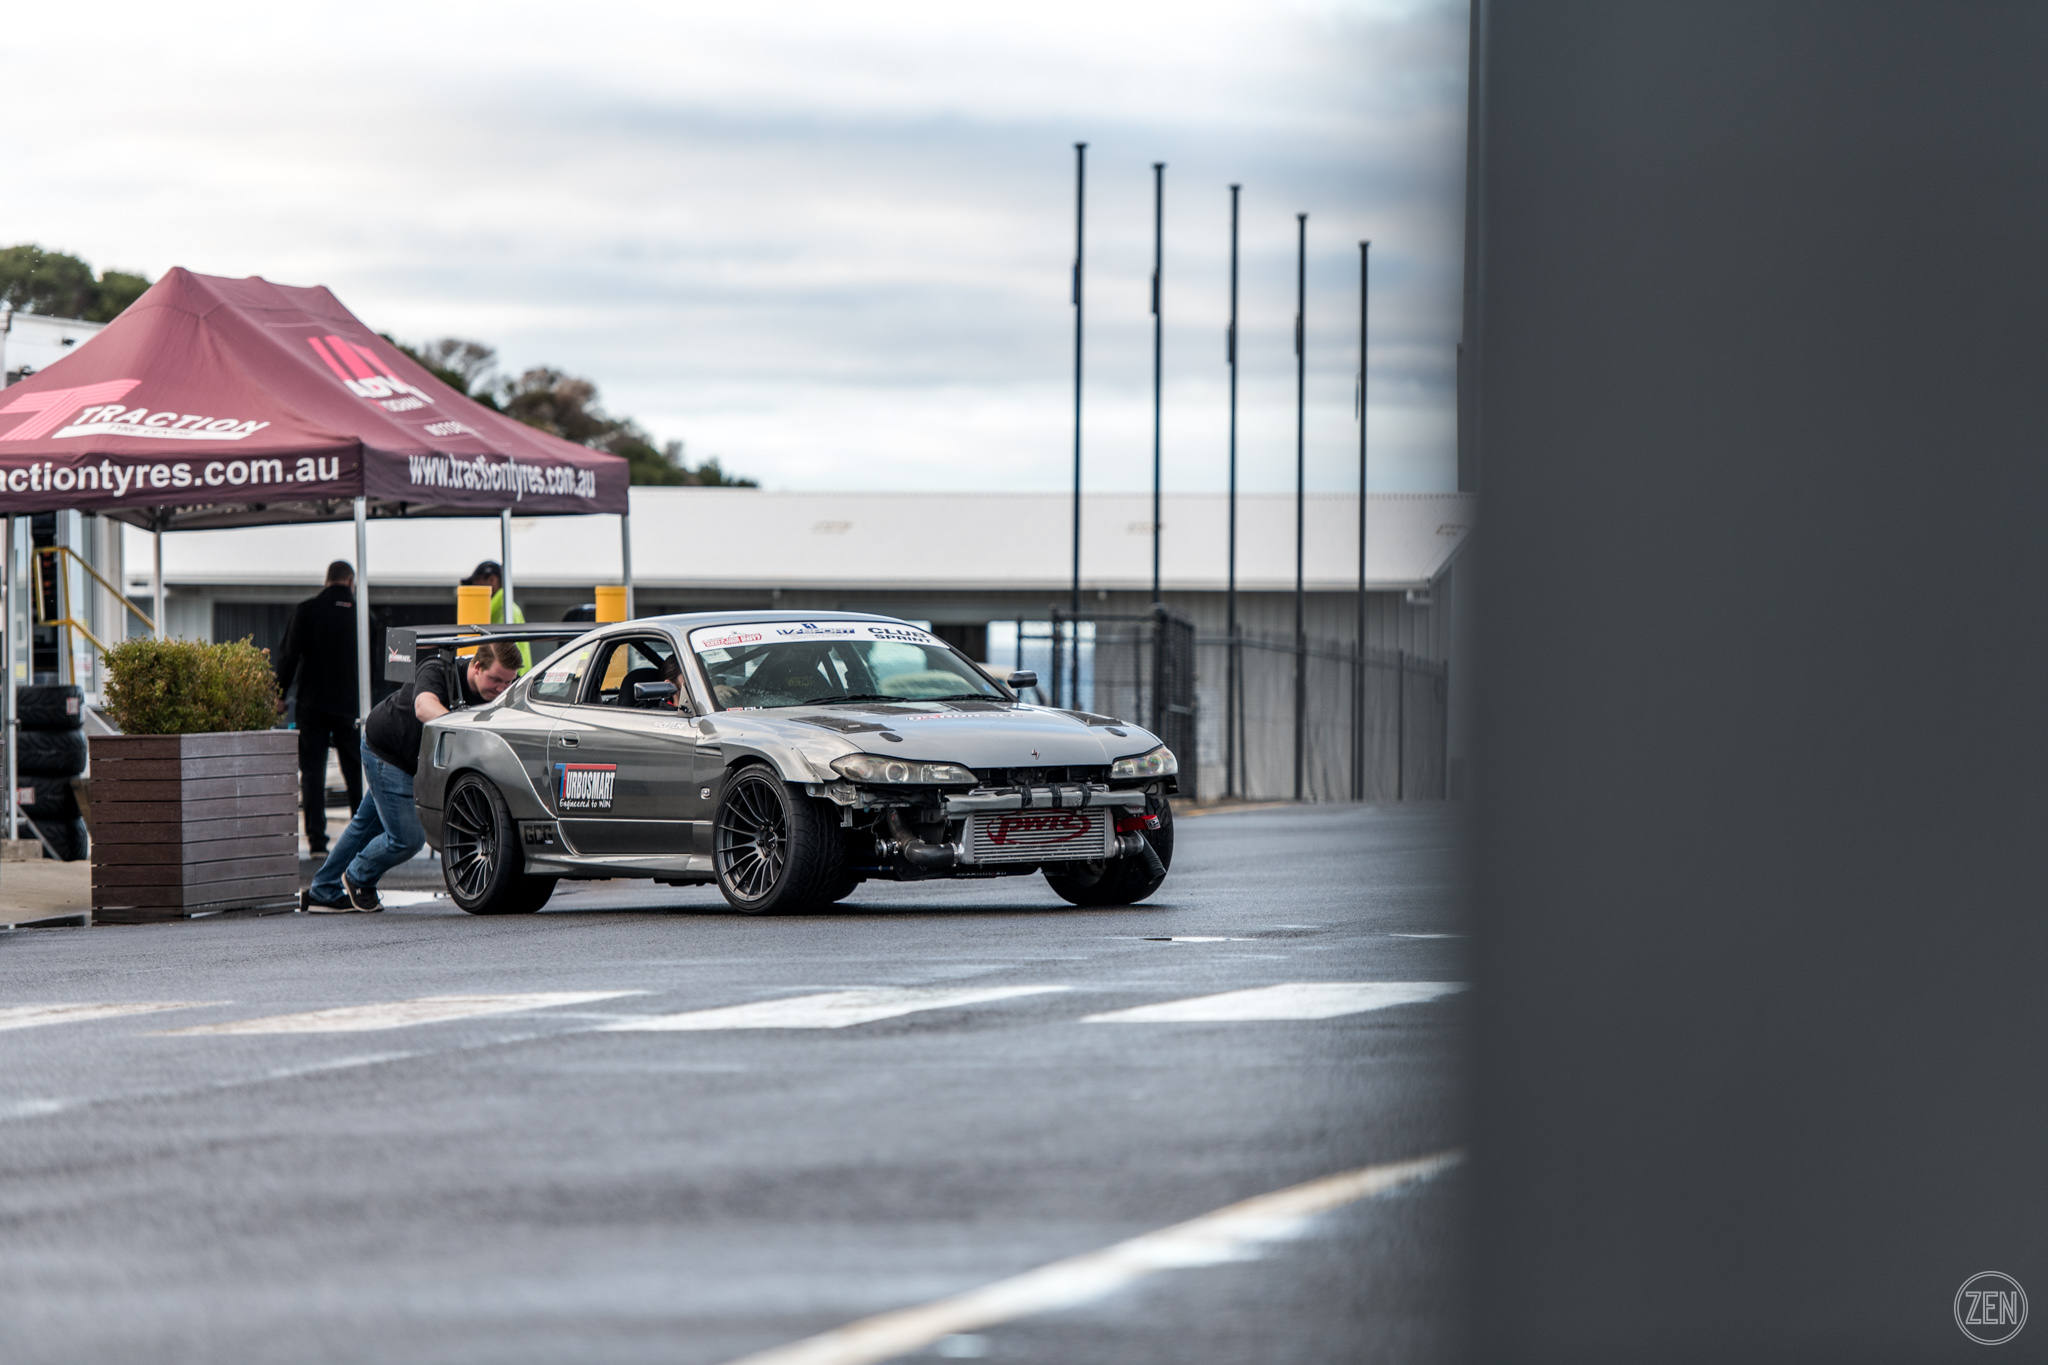 2018-04-06 - Vic Time Attack 005